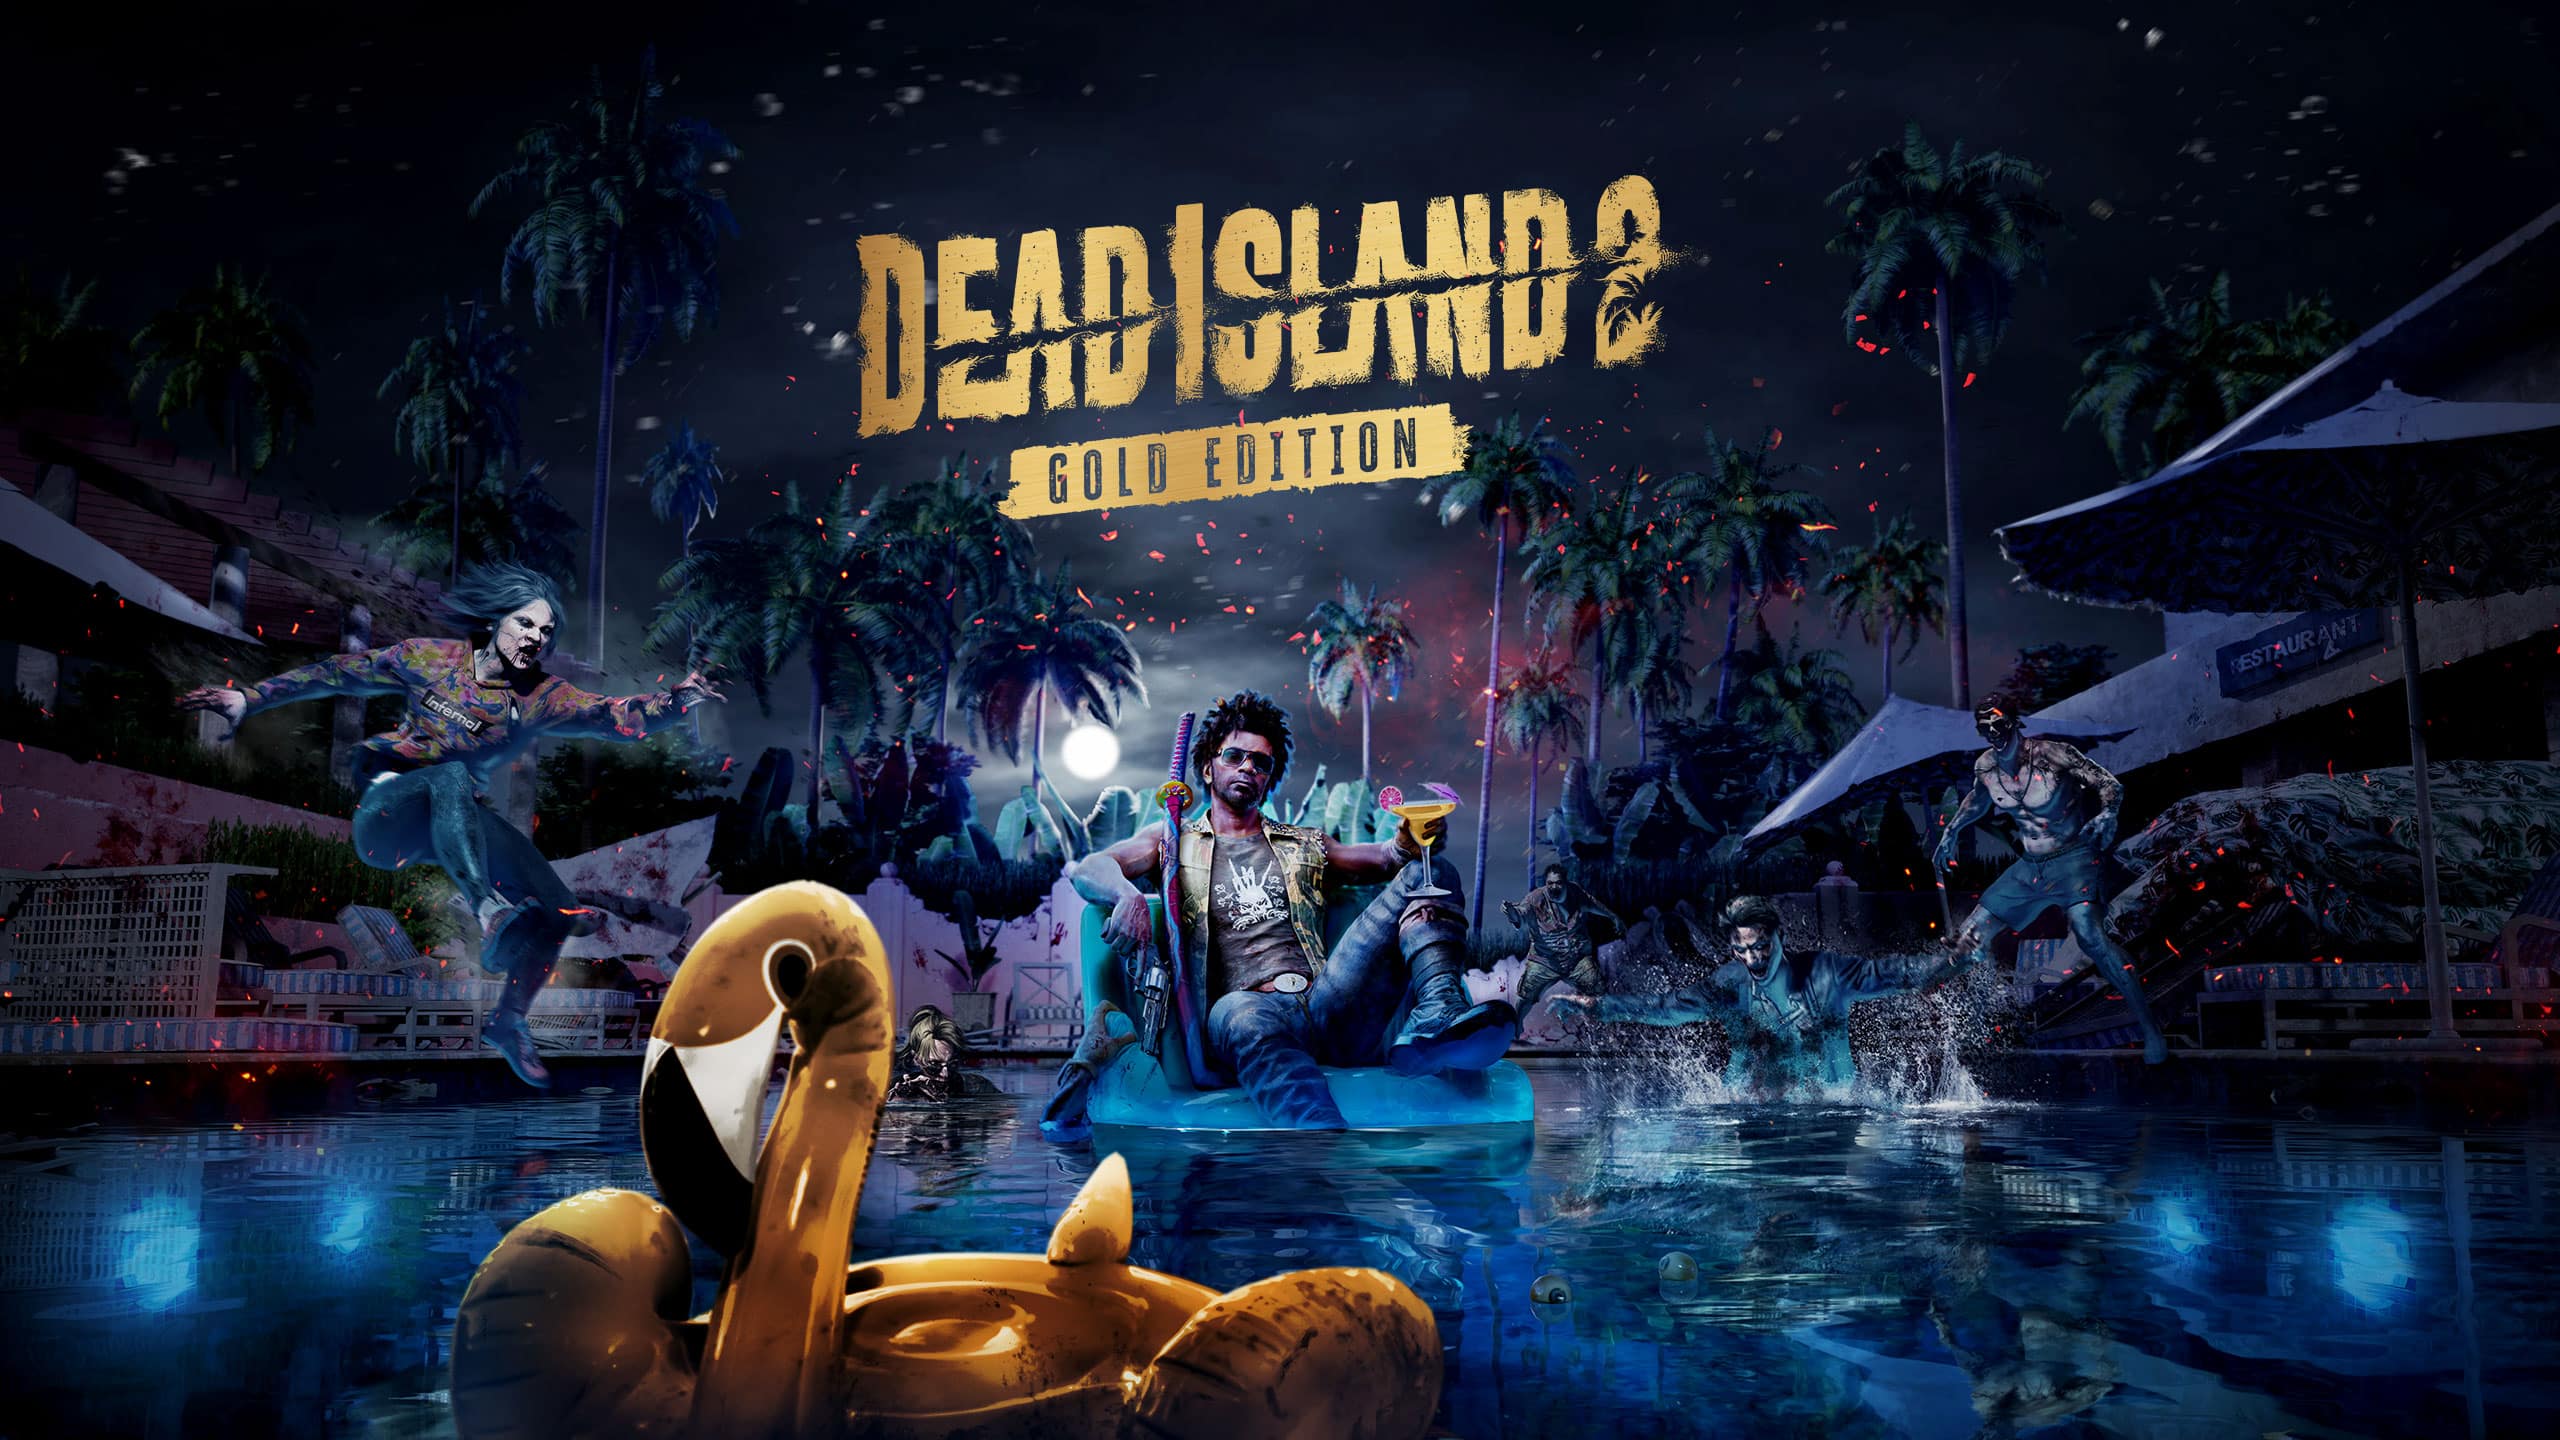 dead-island-2-different-editions-revealed-hell-a-collector-s-edition-content-shown-off